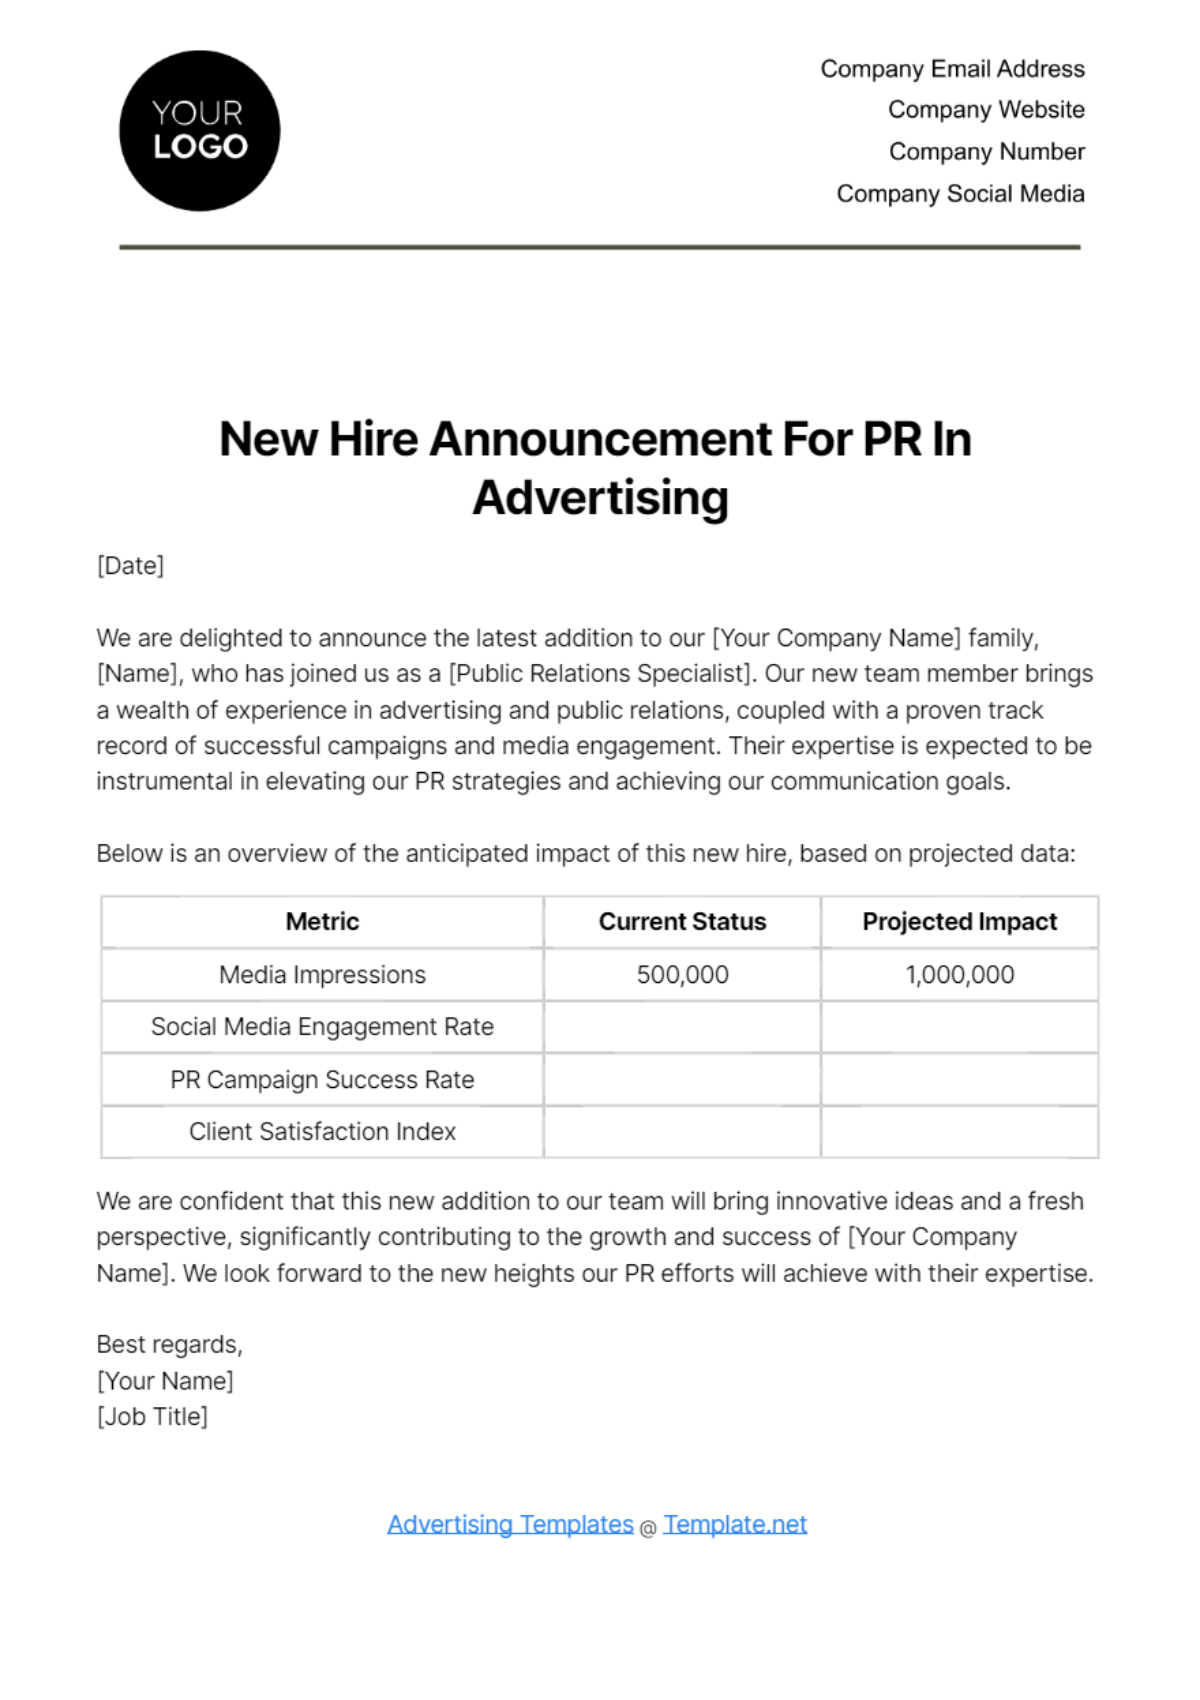 New Hire Announcement for PR in Advertising Template